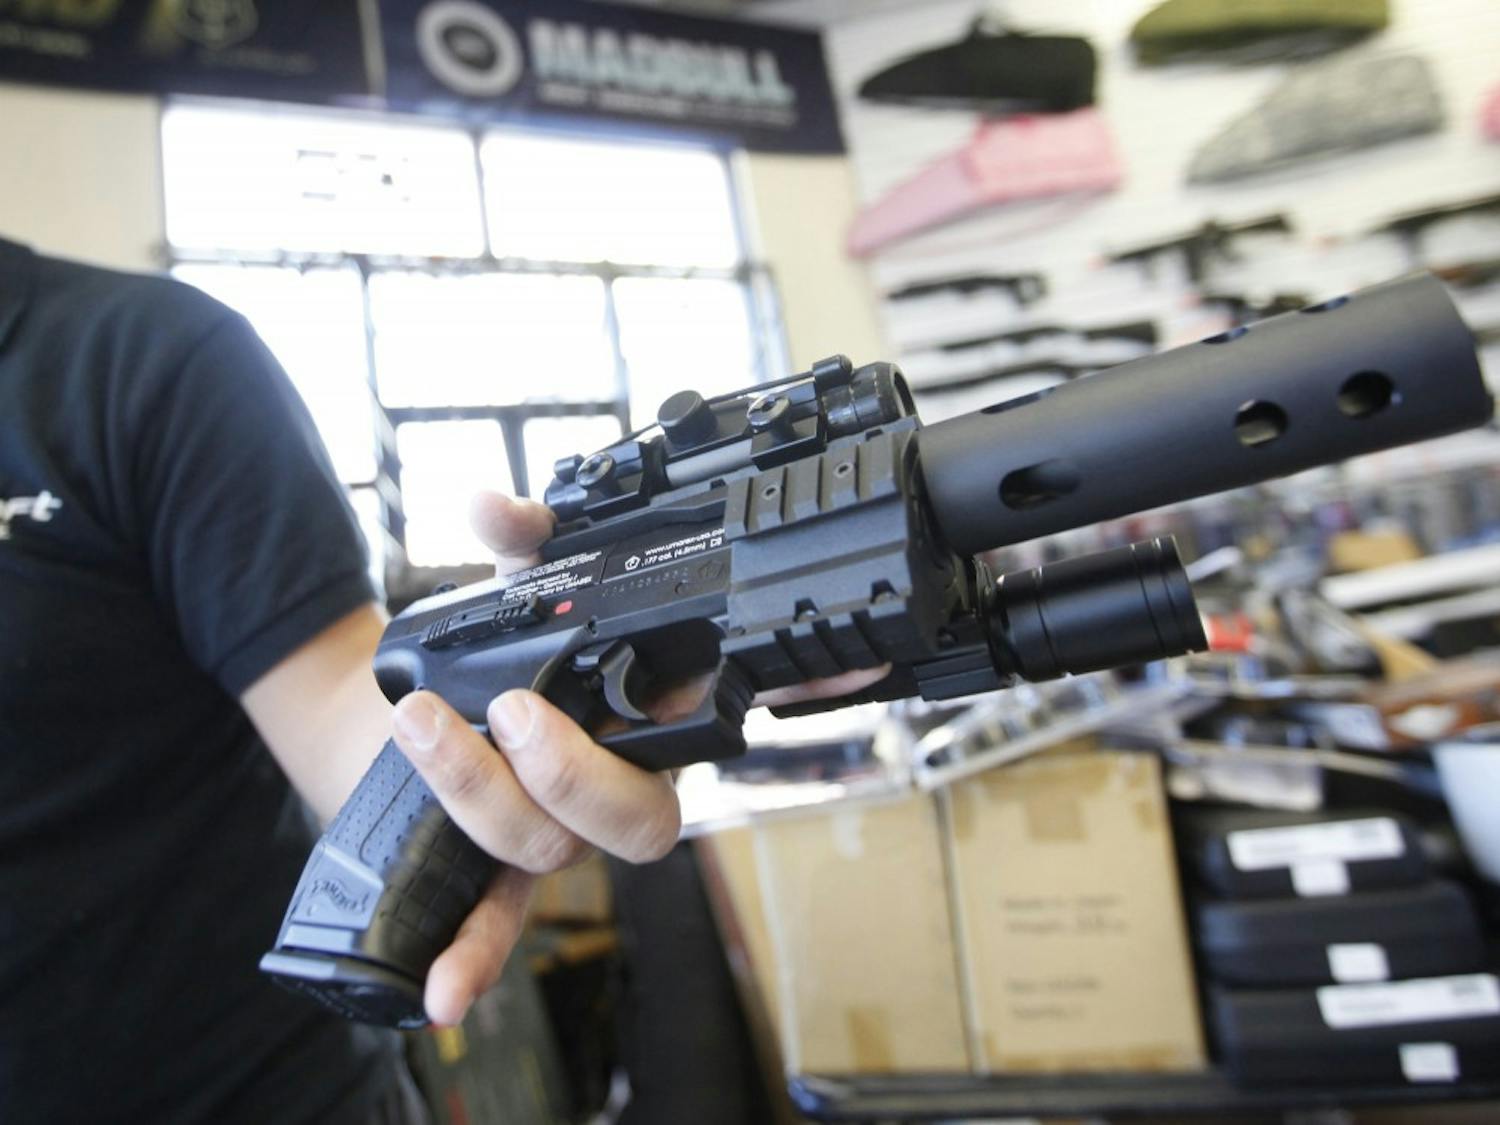 Jordan Baylon, 22, holds a realistic-looking air gun. For him and many others in the world of airsoft fighting, the appeal of the weapons lies in their realism. (Bob Chamberlin/Los Angeles Times/TNS)